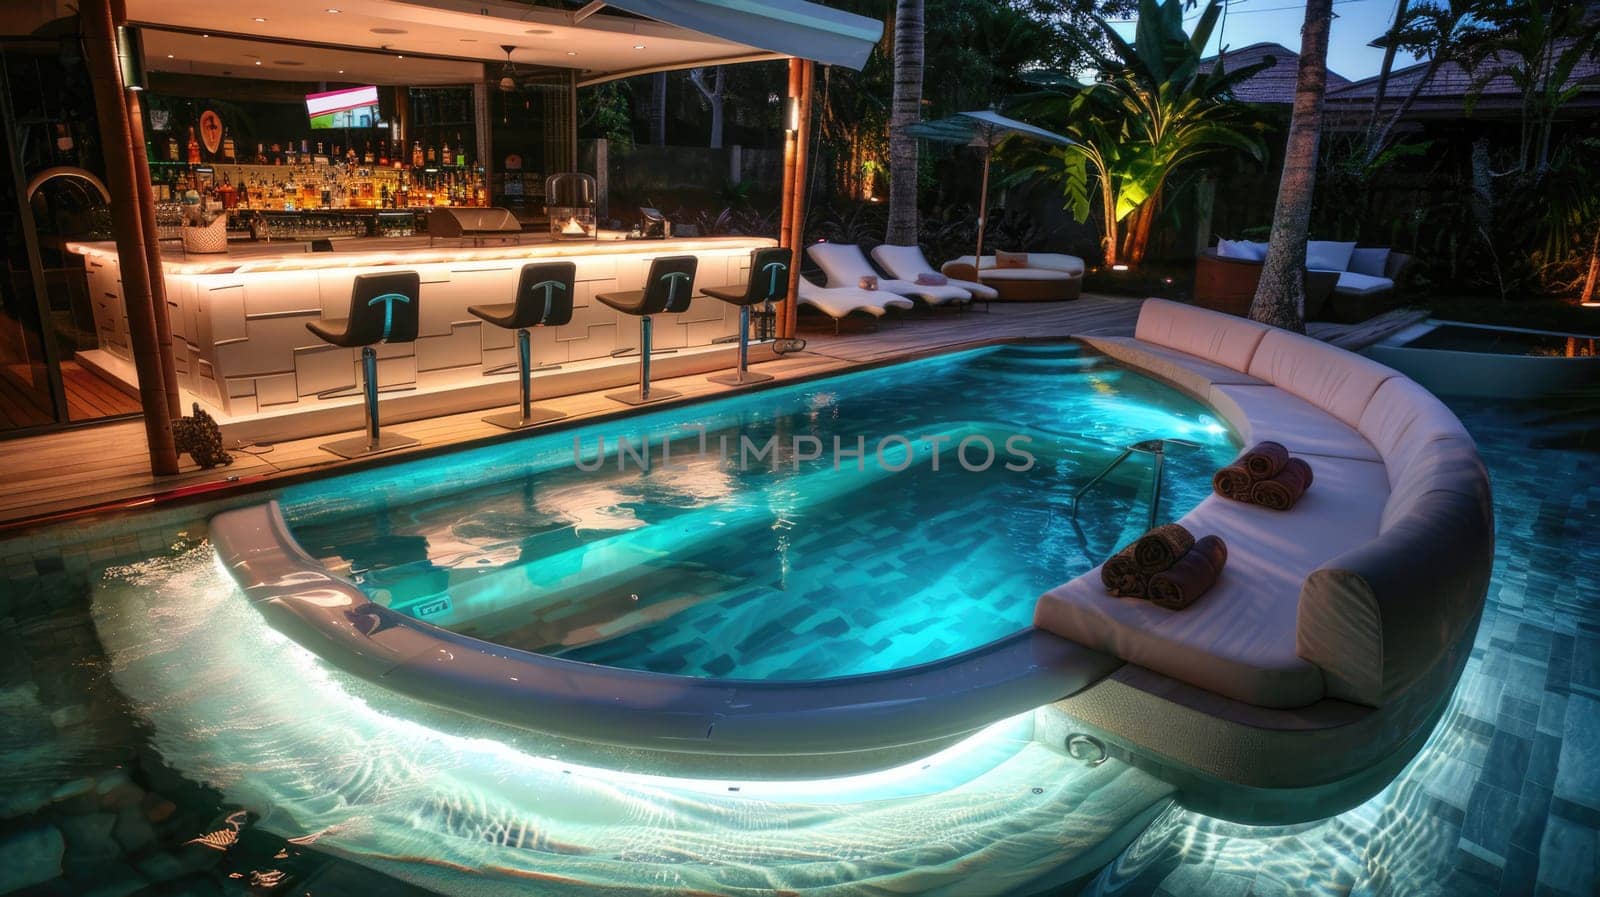 Stunning luxury backyard view of pool with bar by natali_brill